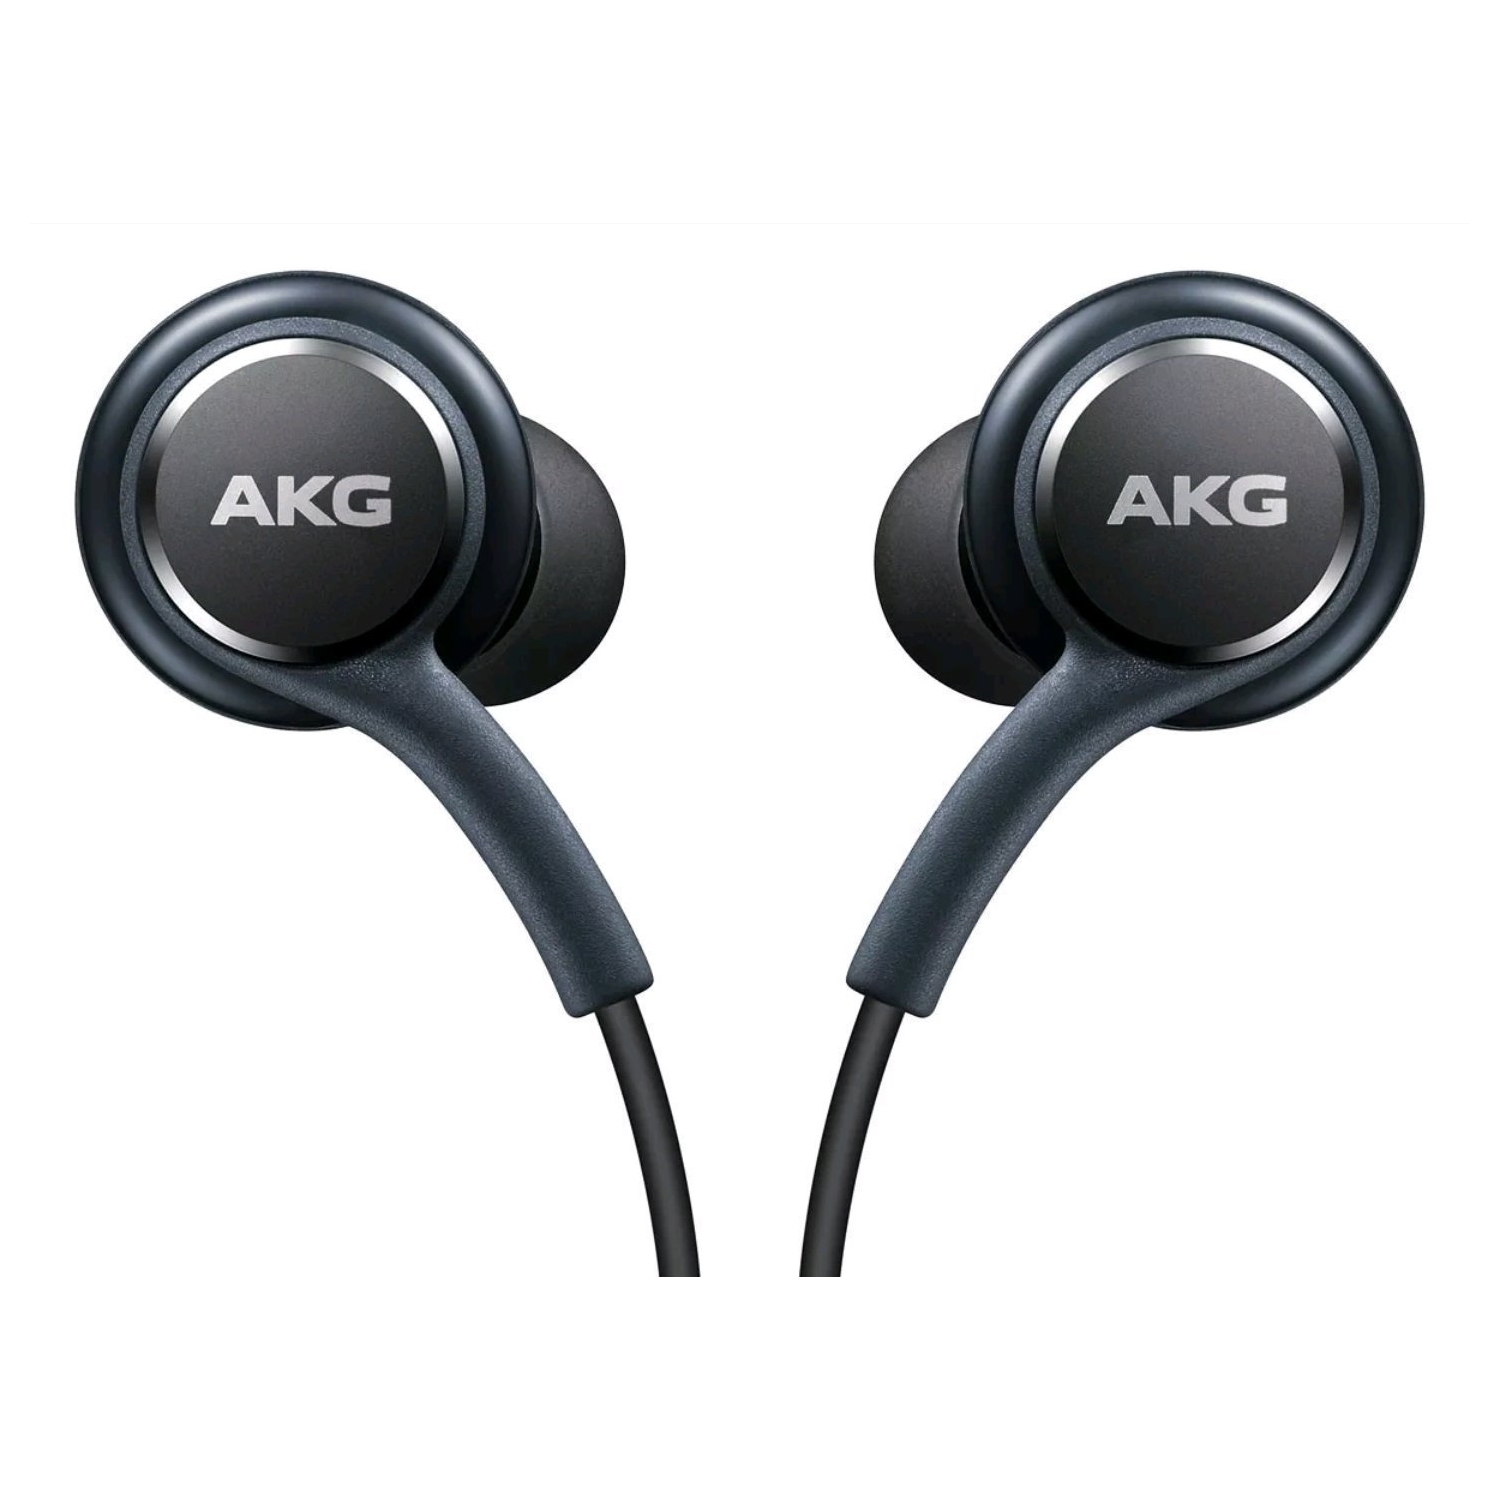 Samsung Earphones Headphone Corded Tuned by AKG Samsung Galaxy S8 and S8+ Inbox replacement